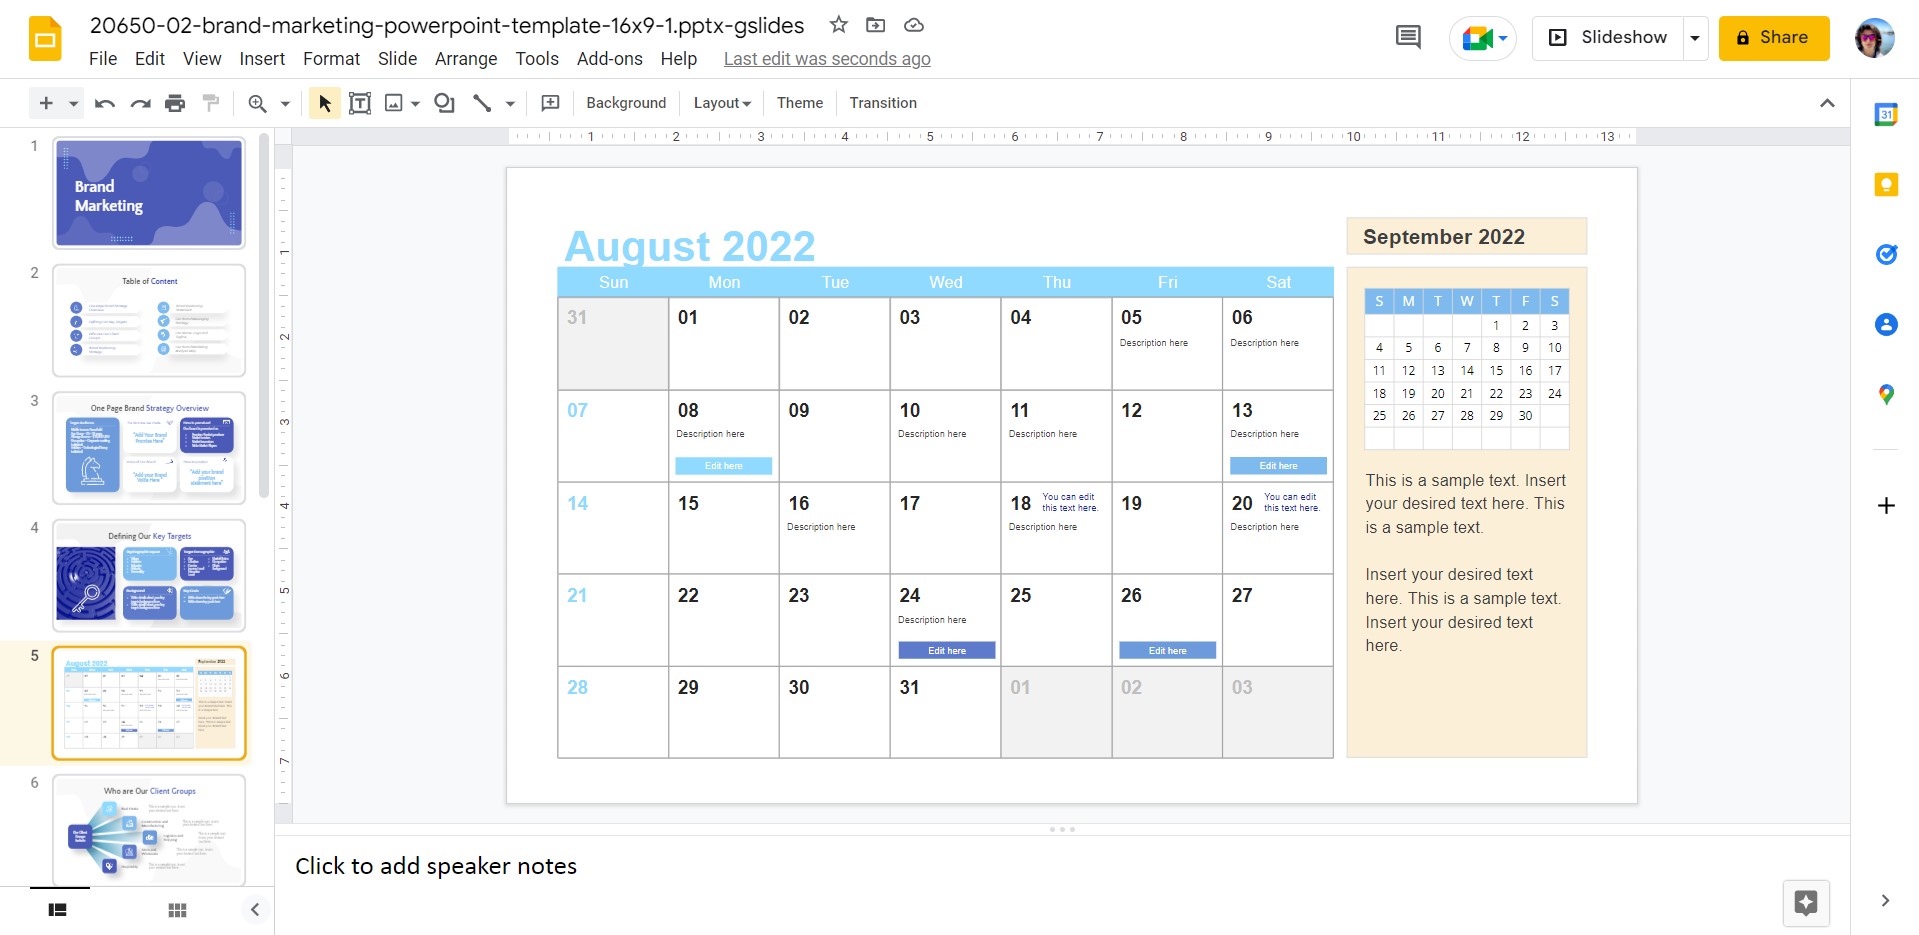 new calendar slide imported with presentation's theme